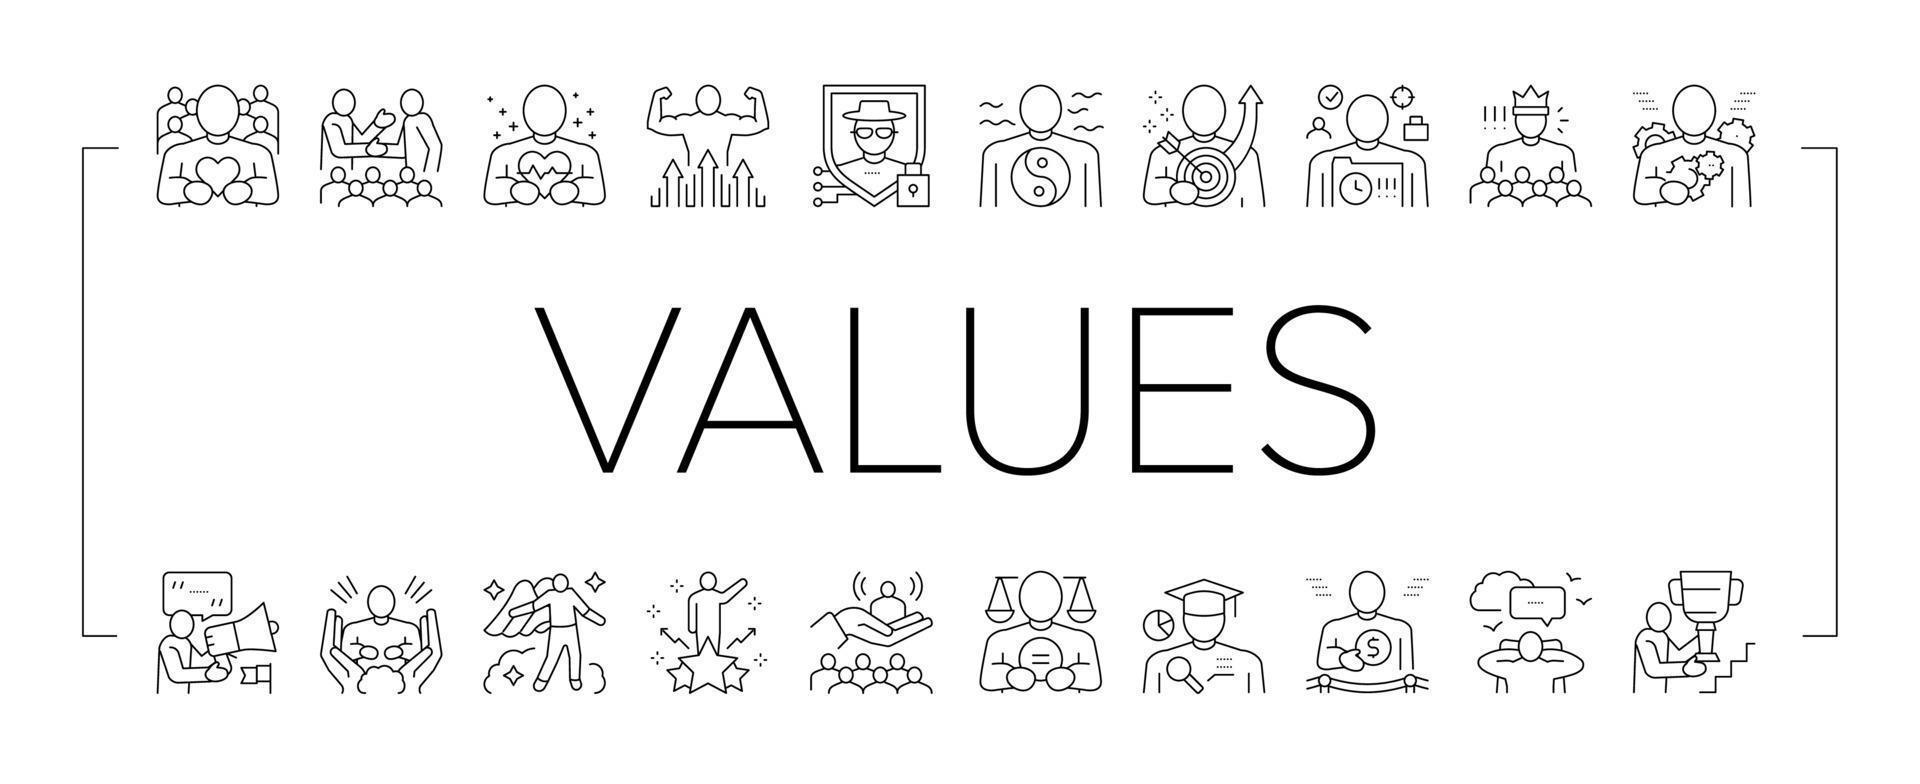 Values Human Life Collection Icons Set Vector